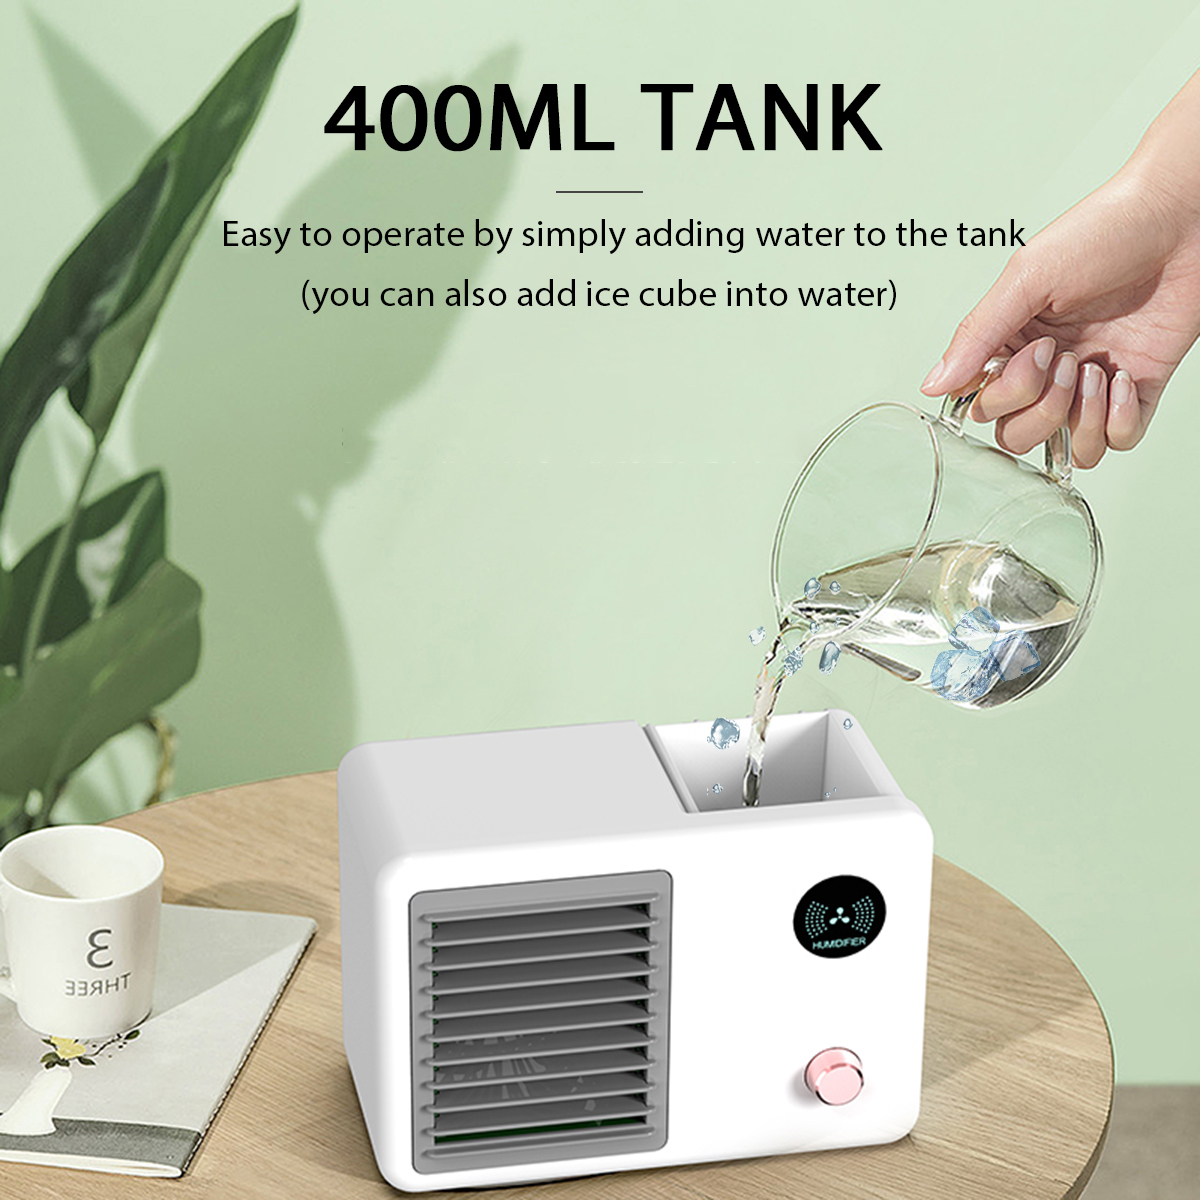 400ml-Air-Conditioner-3-Speed-7-Color-Light-2000mAh-Mini-USB-Air-Fan-Water-cooled-Spray-Fan-1836378-4